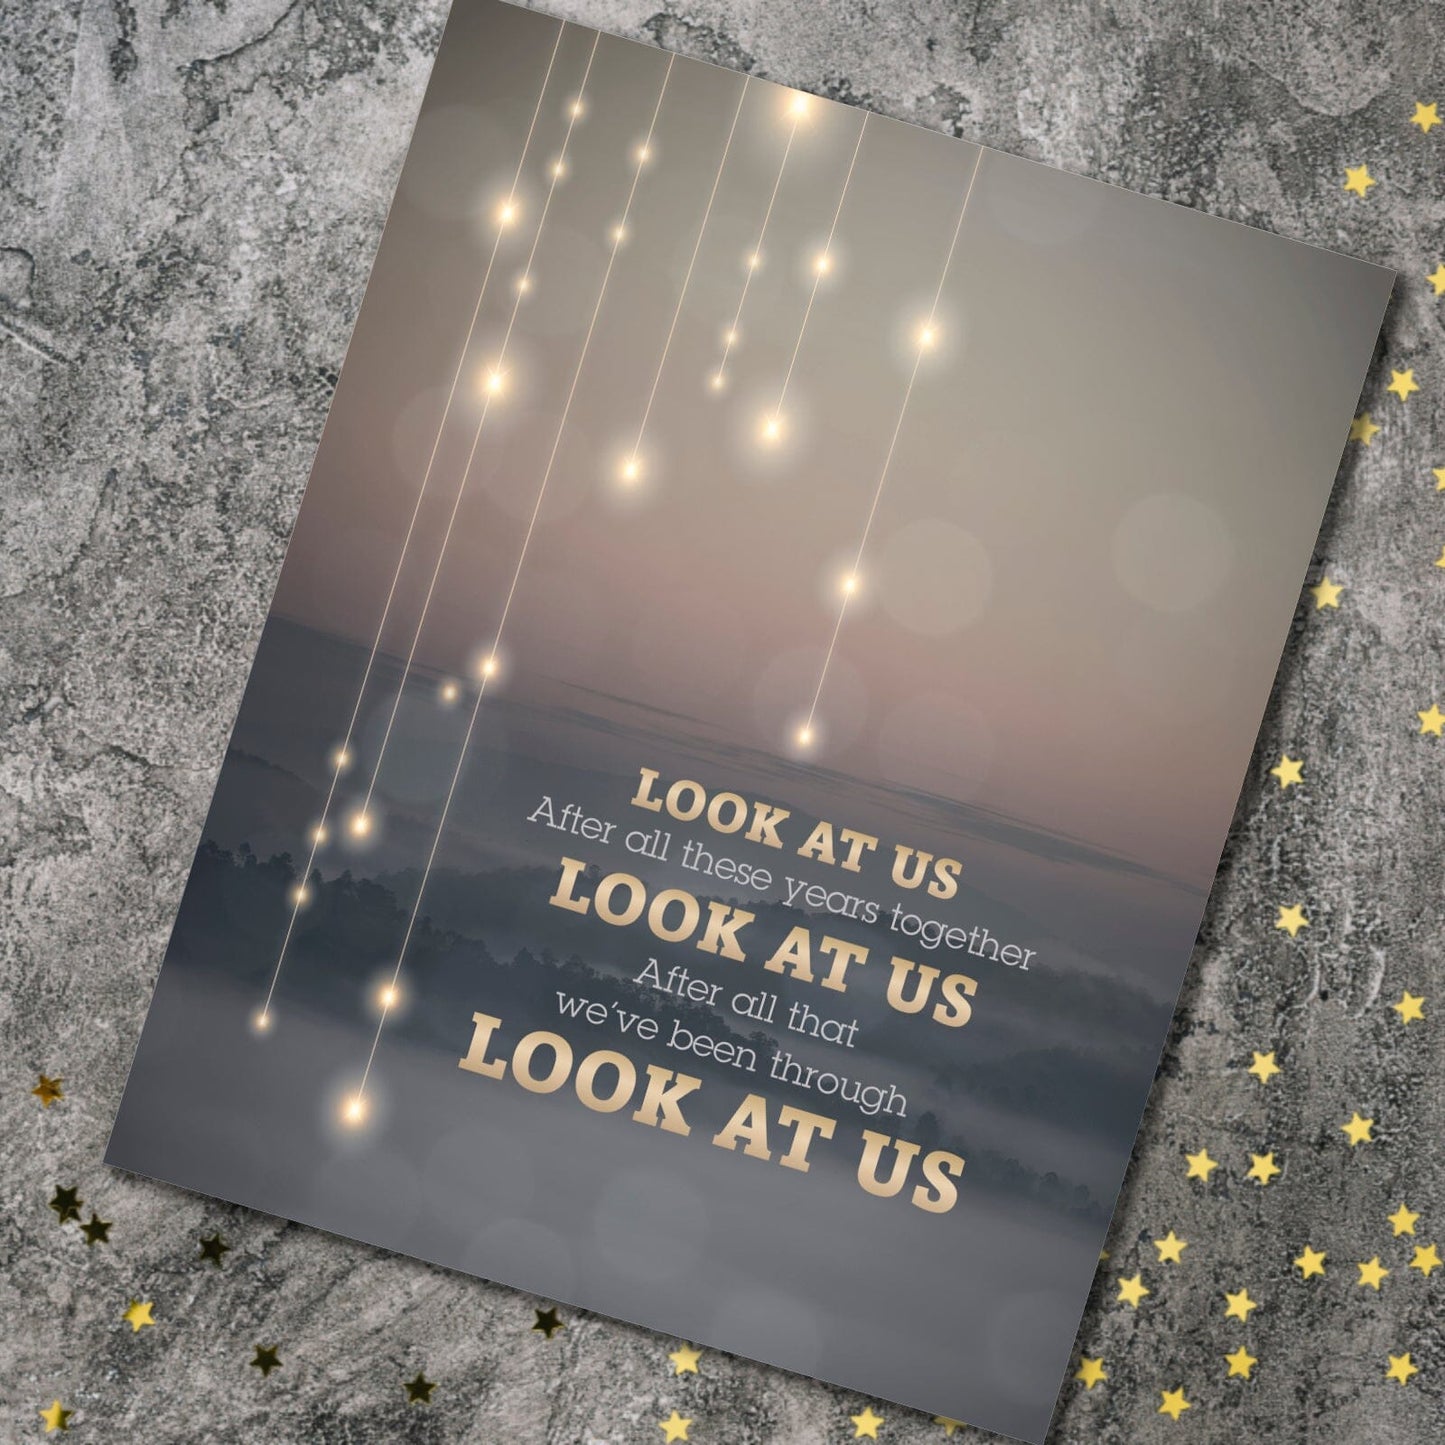 Look at Us by Vince Gill - Pop Country Song Art Song Lyrics Art Song Lyrics Art 8x10 Print 